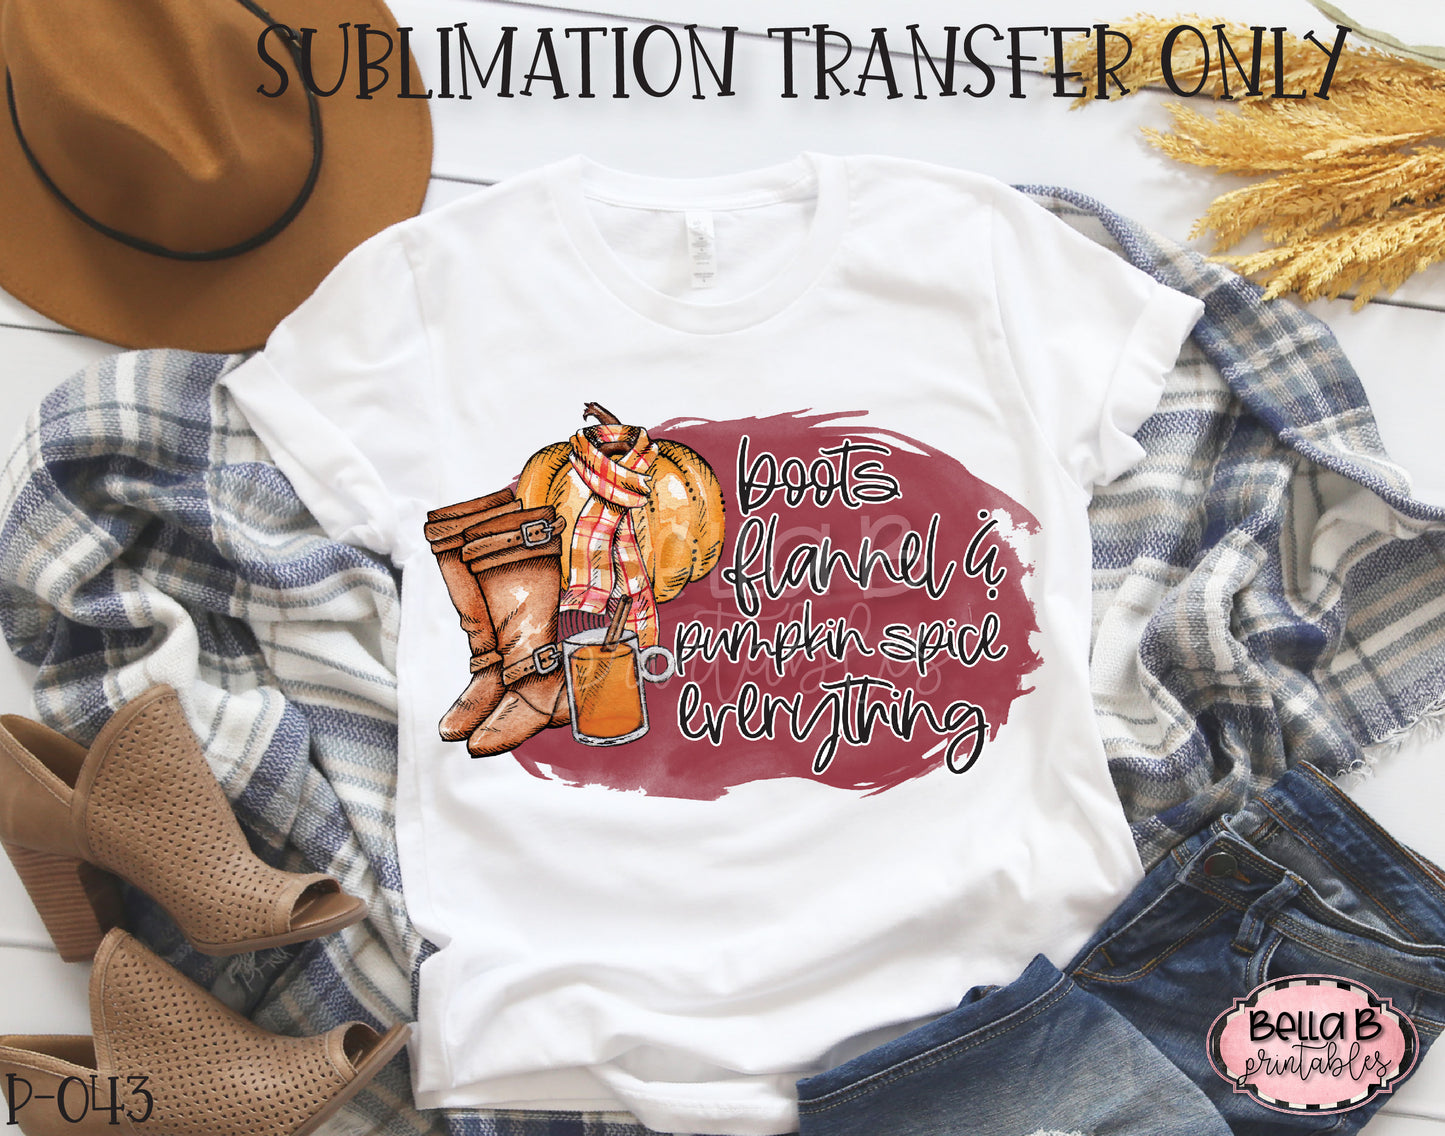 Boots Flannels Pumpkin Spice Everything Sublimation Transfer - Ready To Press